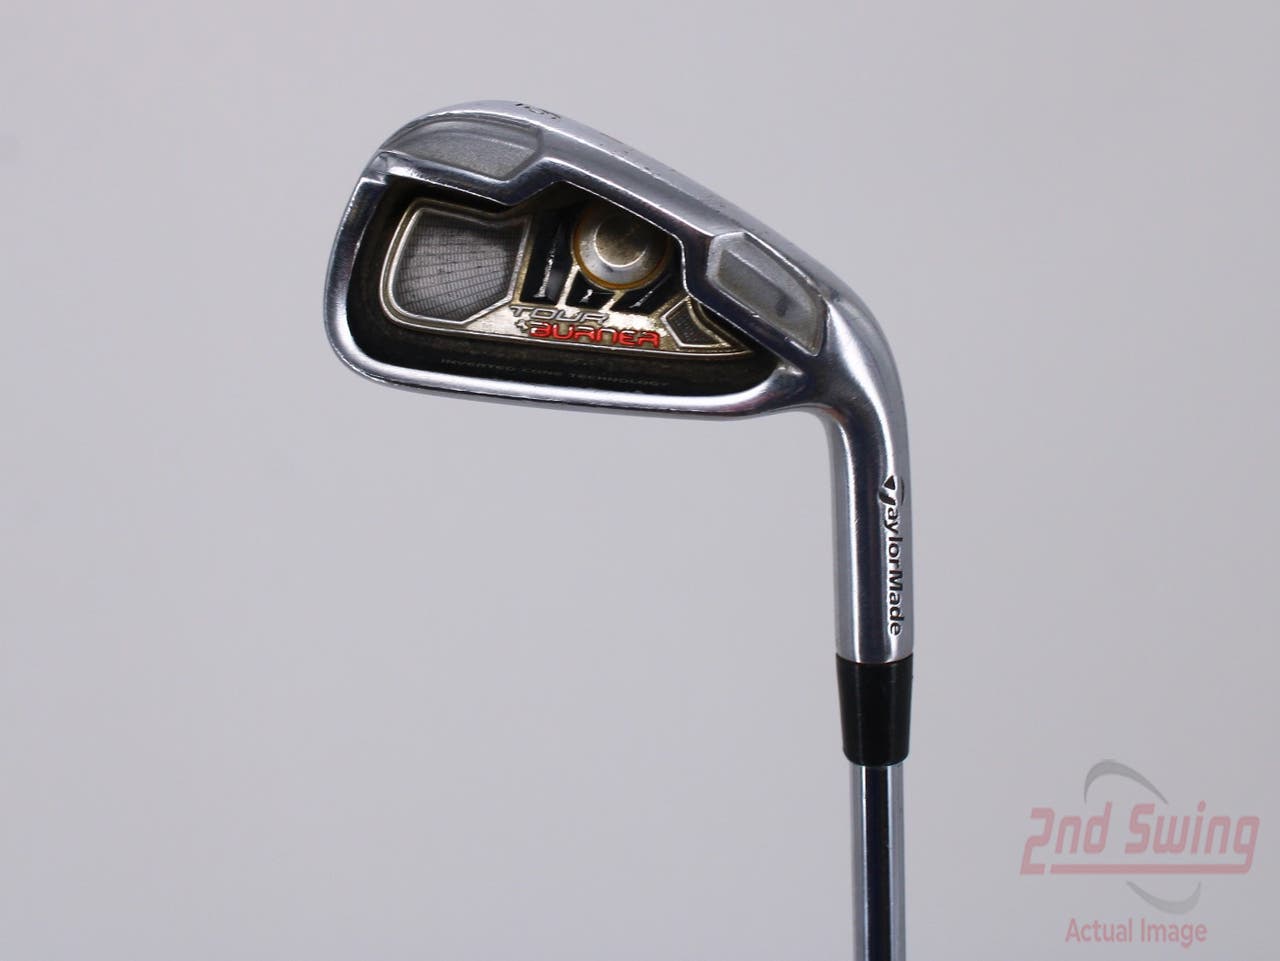 TaylorMade Tour Burner Single Iron 6 Iron Stock Steel Shaft Steel Stiff Right Handed 37.75in